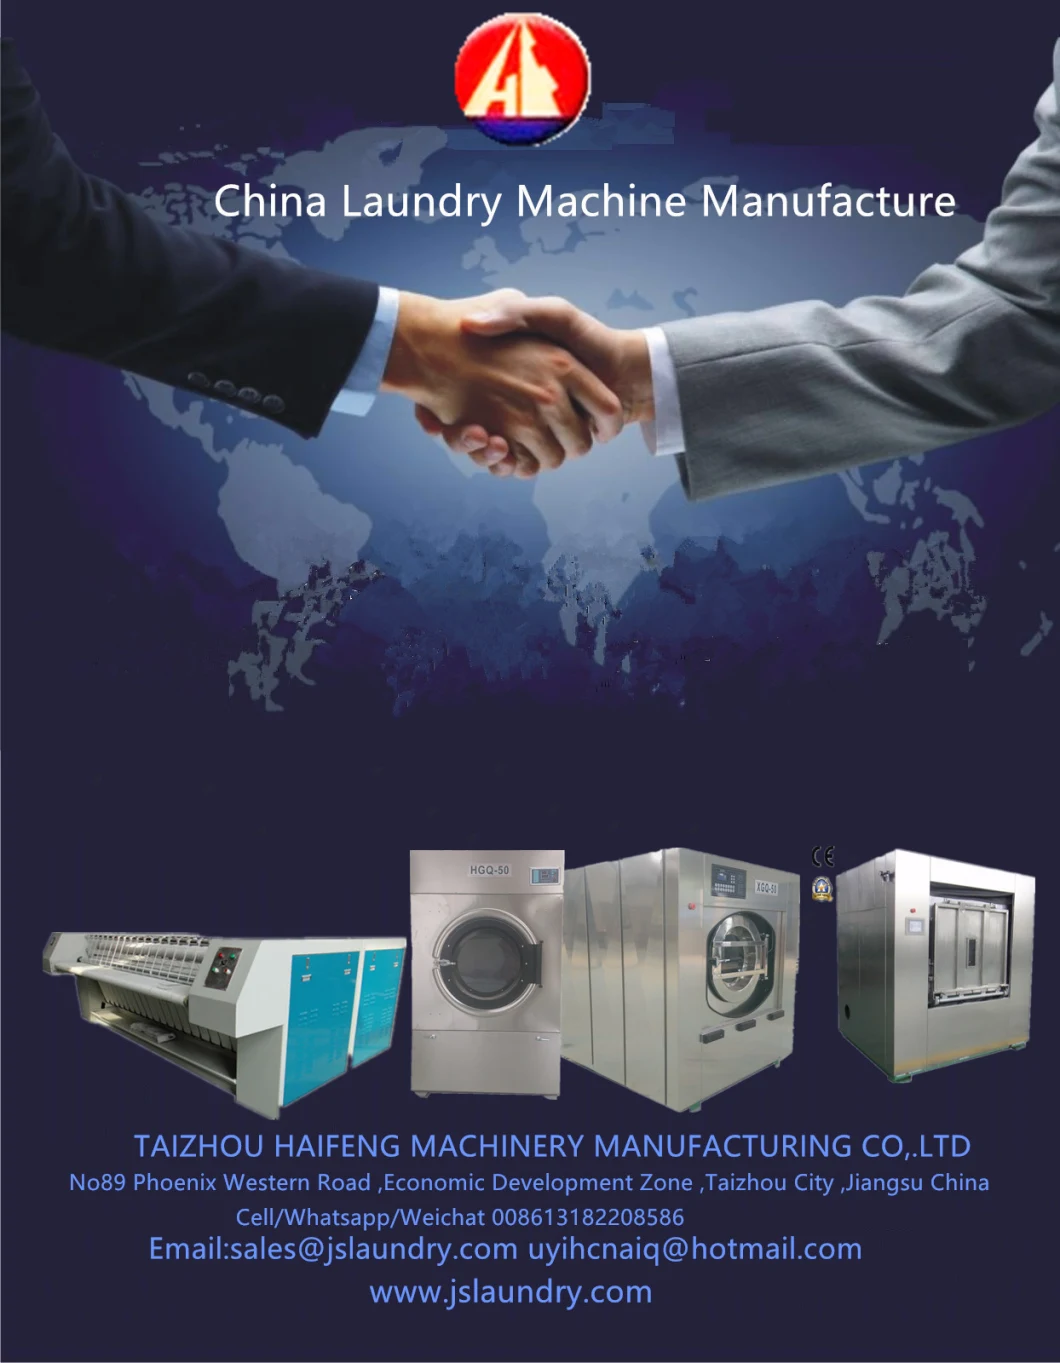 Quality Dry Cleaning Machine /Dry Cleaner Machine 8kgs 10kgs 12kgs for Sale (ISO9001 and CE)